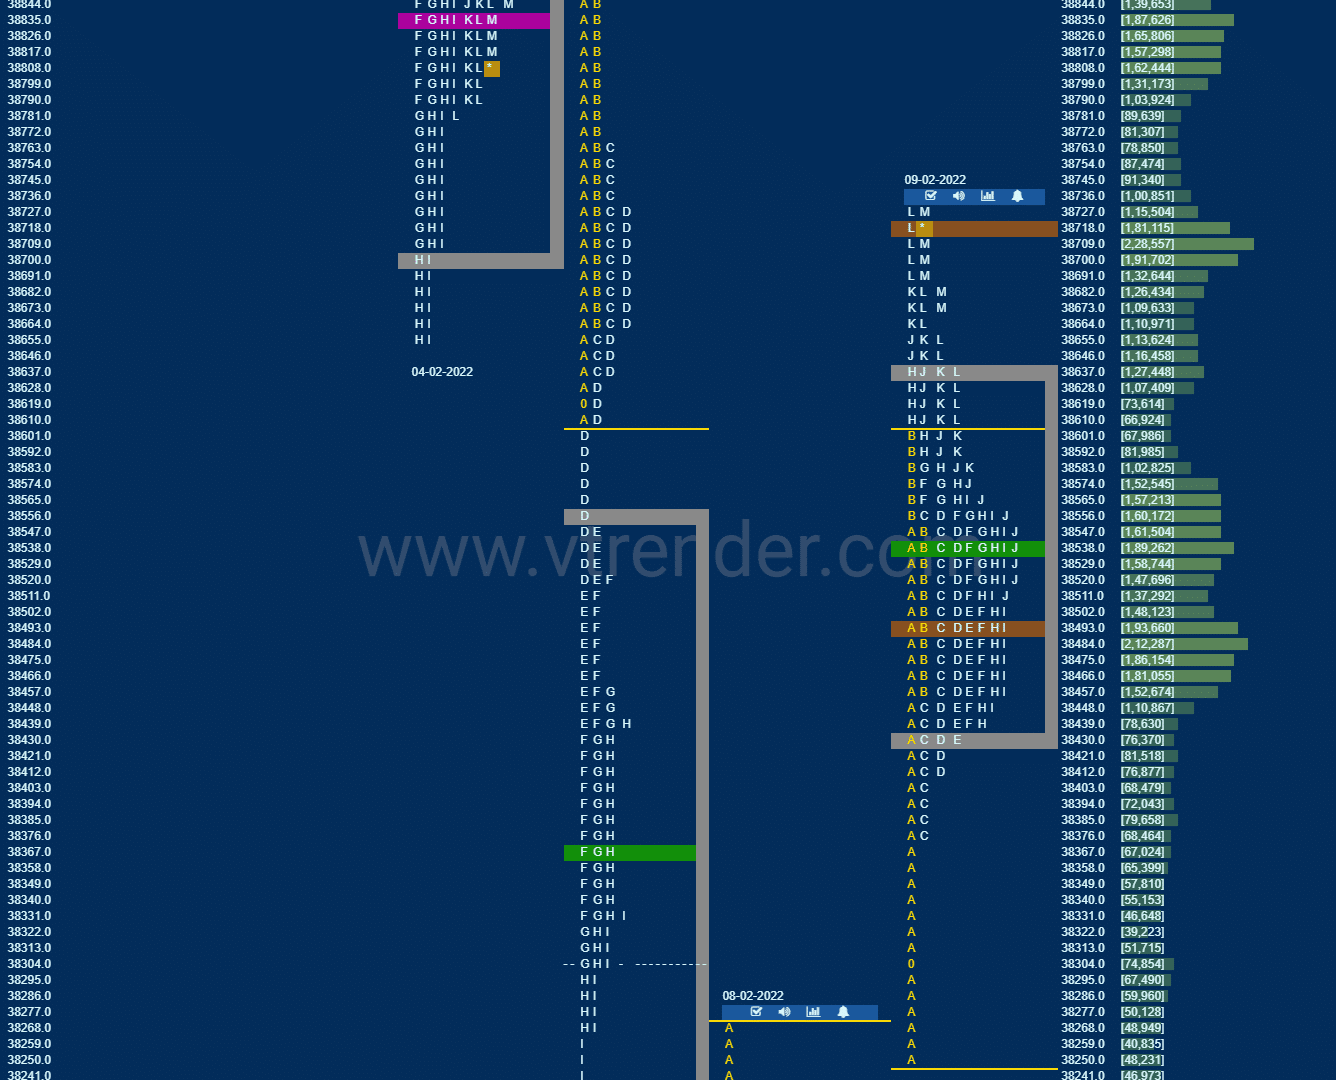 Bnf 6 Market Profile Analysis Dated 09Th February 2022 Banknifty Futures, Charts, Day Trading, Intraday Trading, Intraday Trading Strategies, Market Profile, Market Profile Trading Strategies, Nifty Futures, Order Flow Analysis, Support And Resistance, Technical Analysis, Trading Strategies, Volume Profile Trading